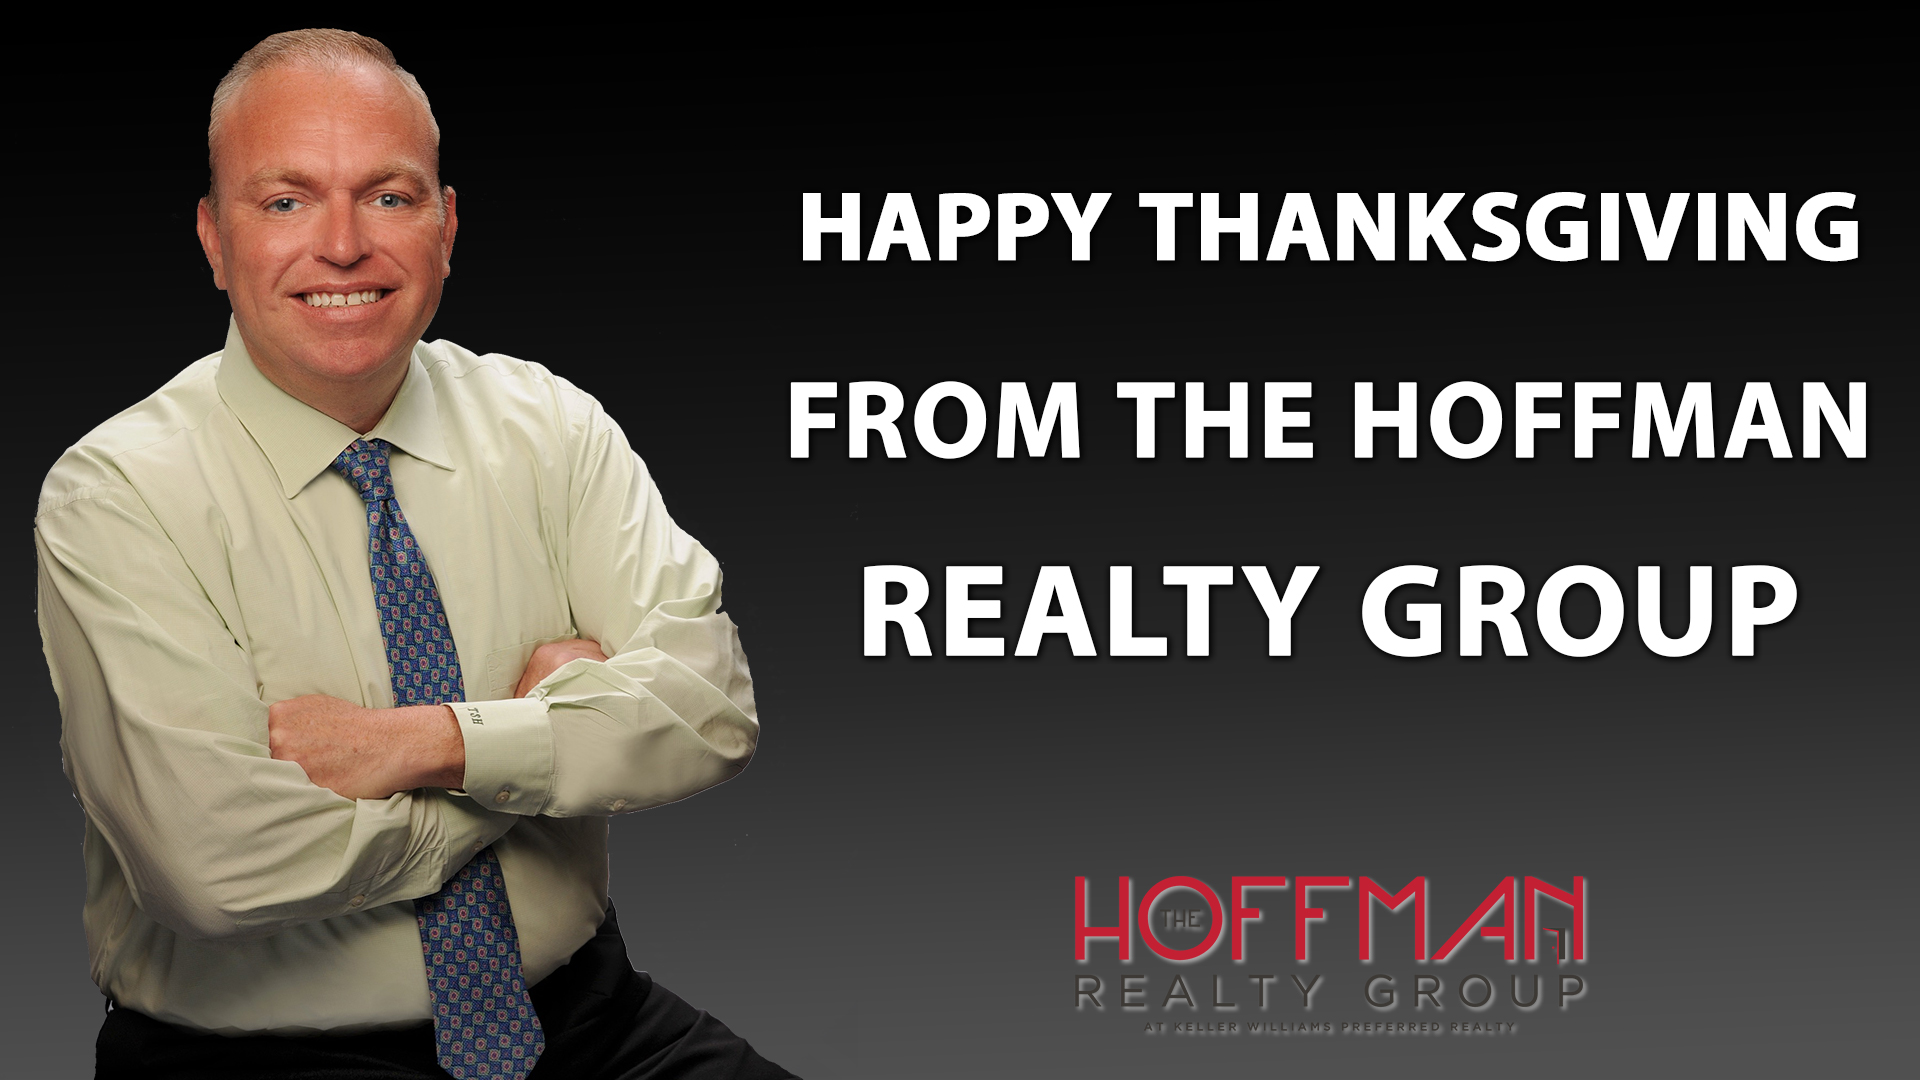 The Hoffman Realty Group Wishes You a Happy Thanksgiving